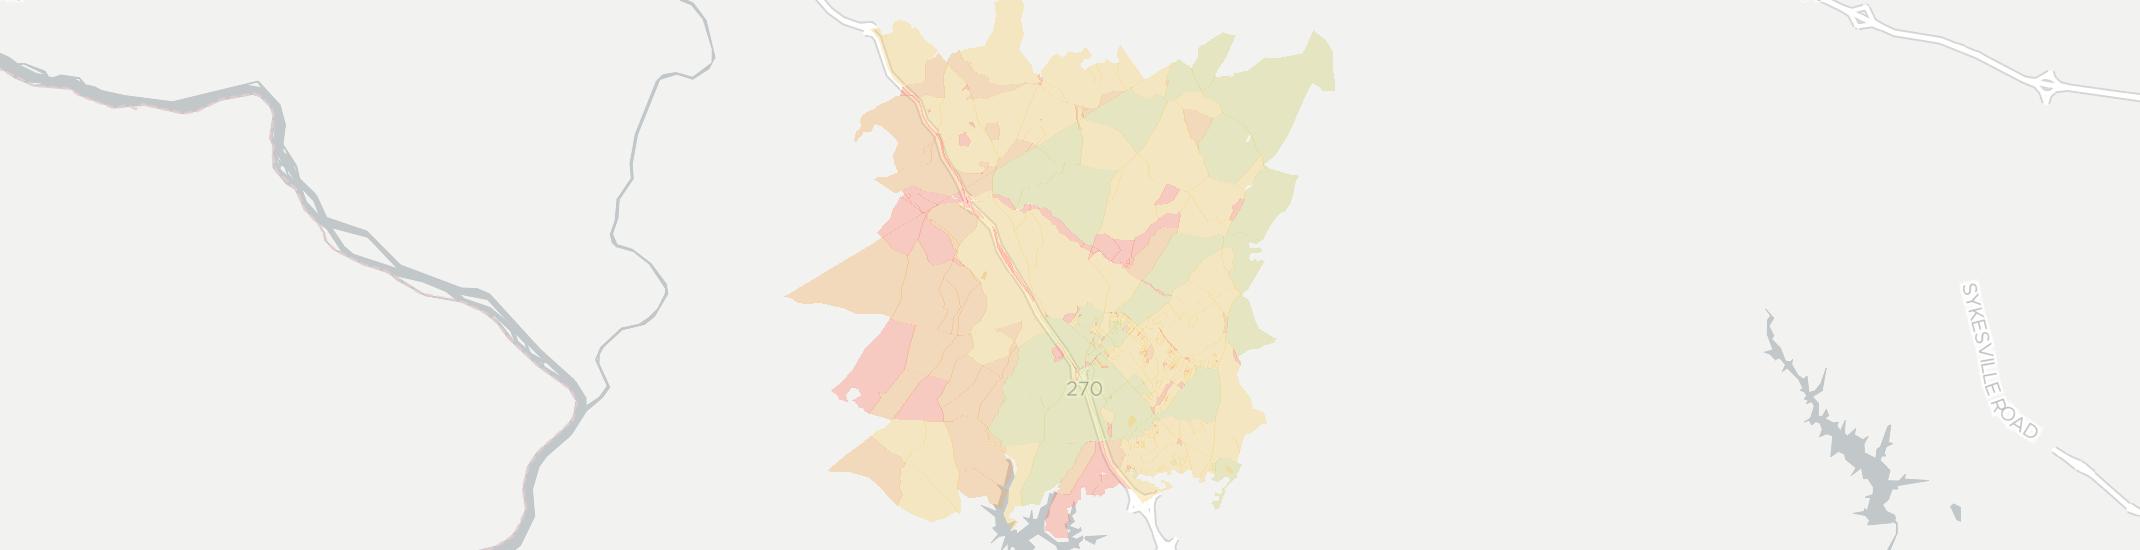 Clarksburg Internet Competition Map. Click for interactive map.